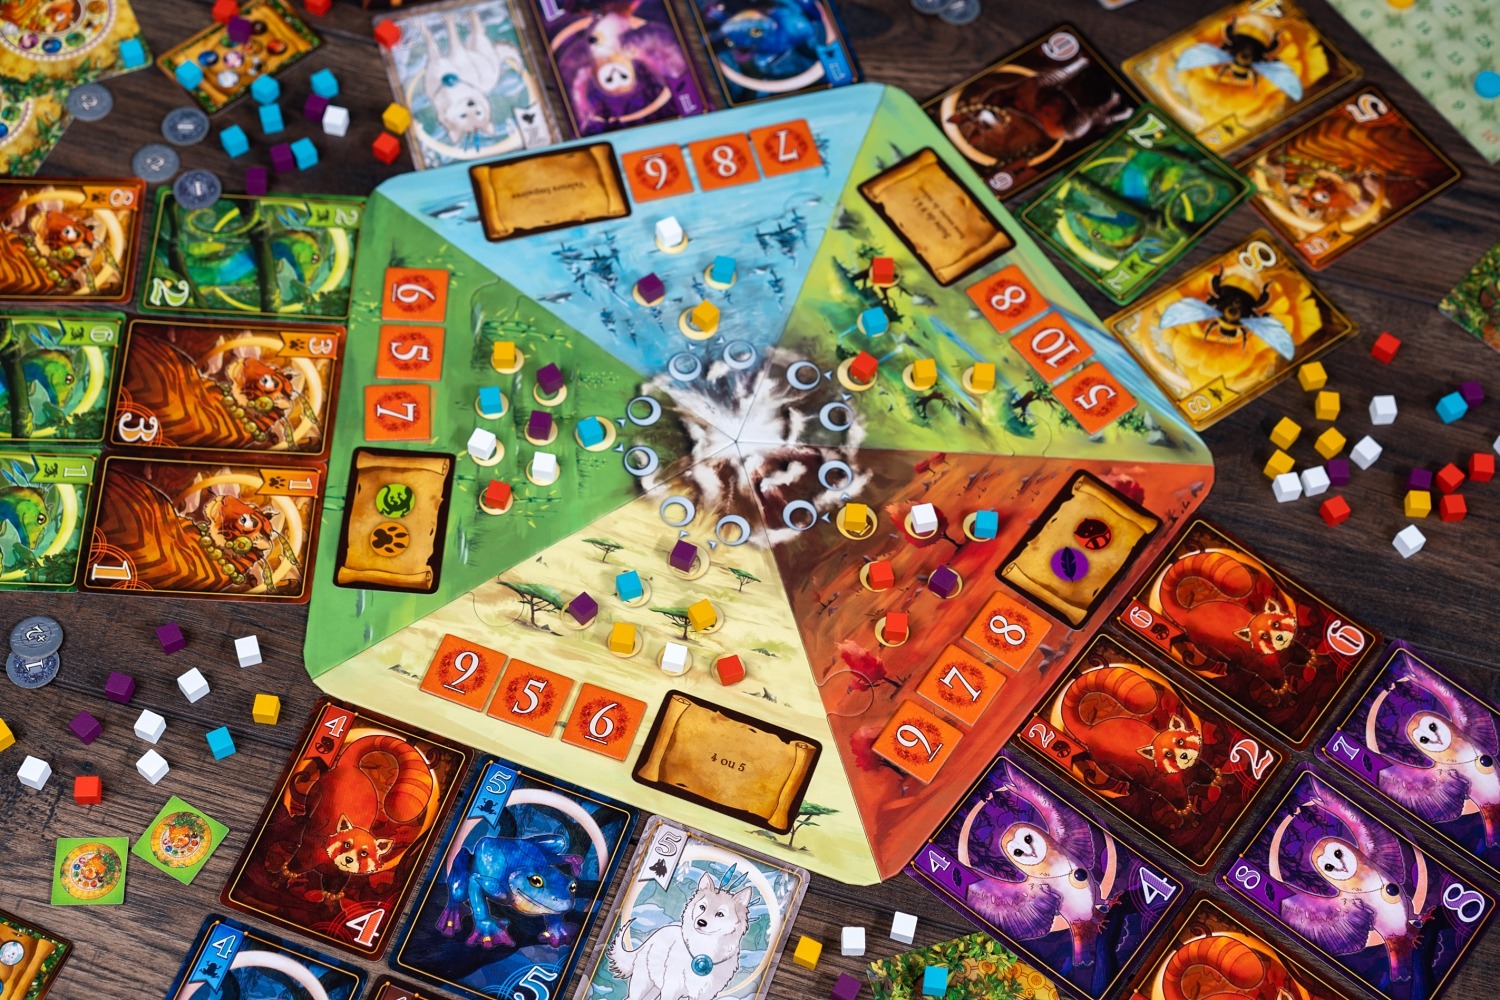 les royaumes sauvages animals kingdoms lucky duck games boardgame